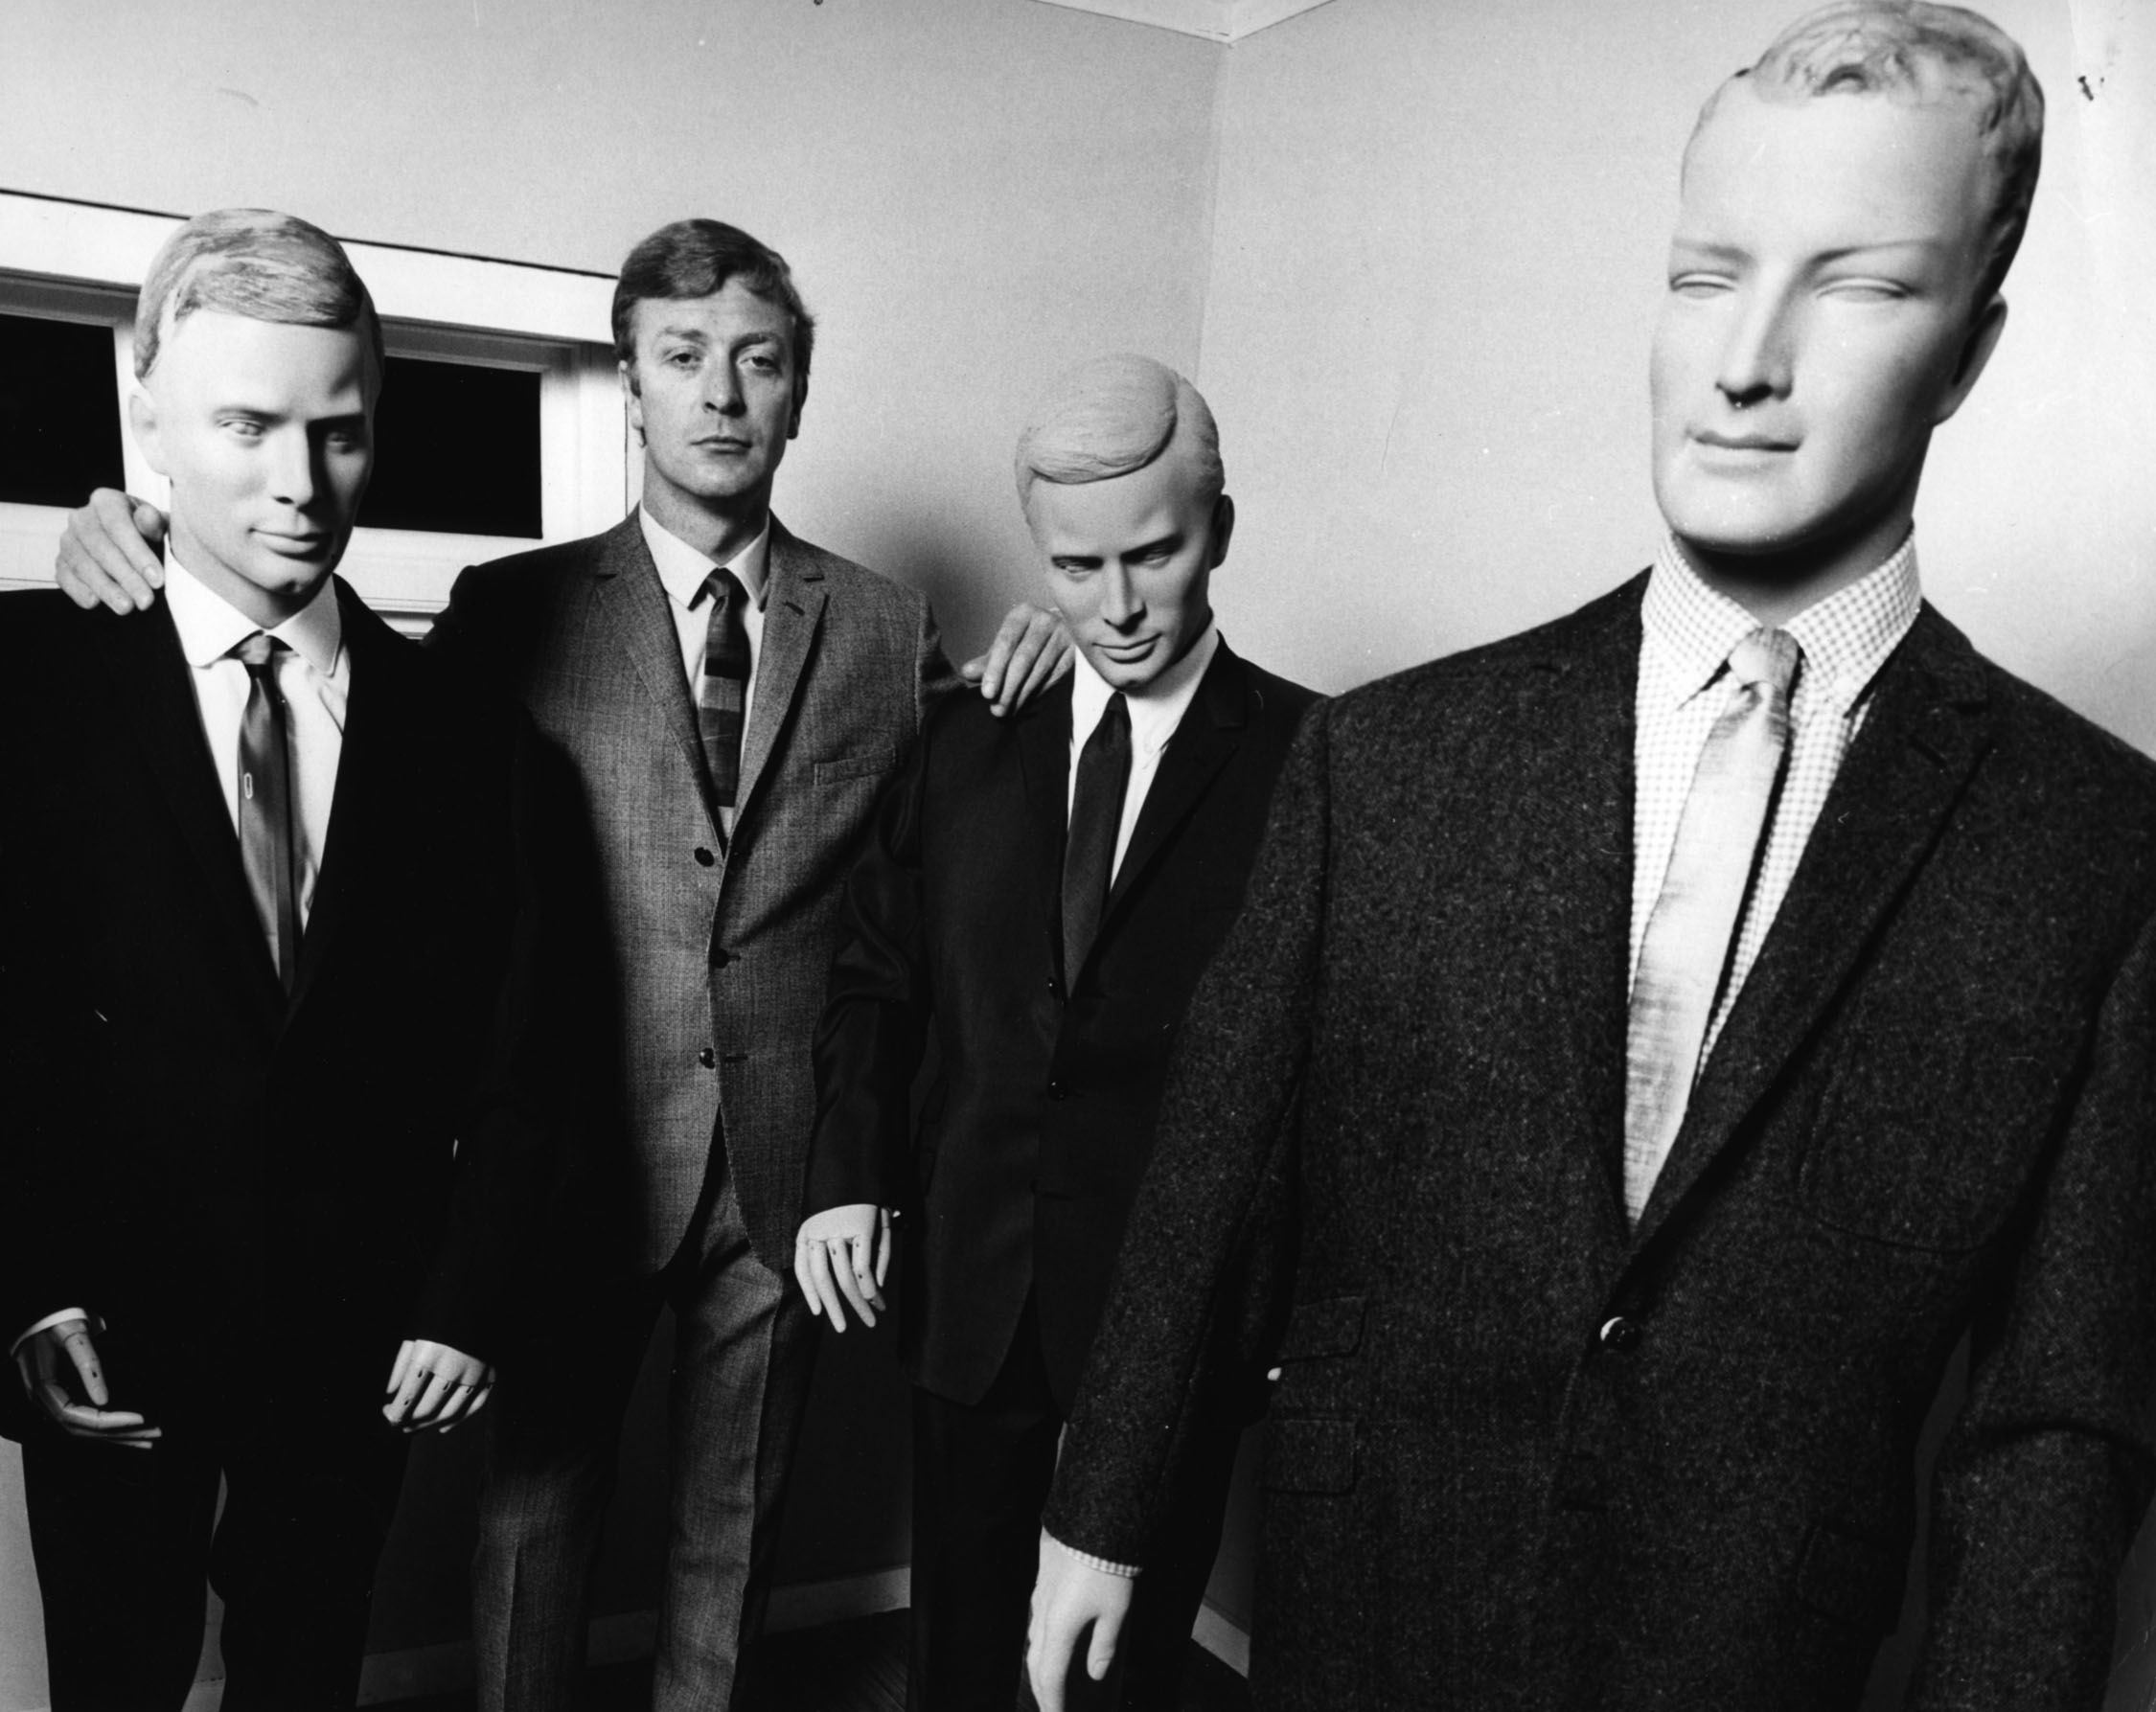 Michael Caine, star of Alfie (1966), poses with suits made to promote the film.